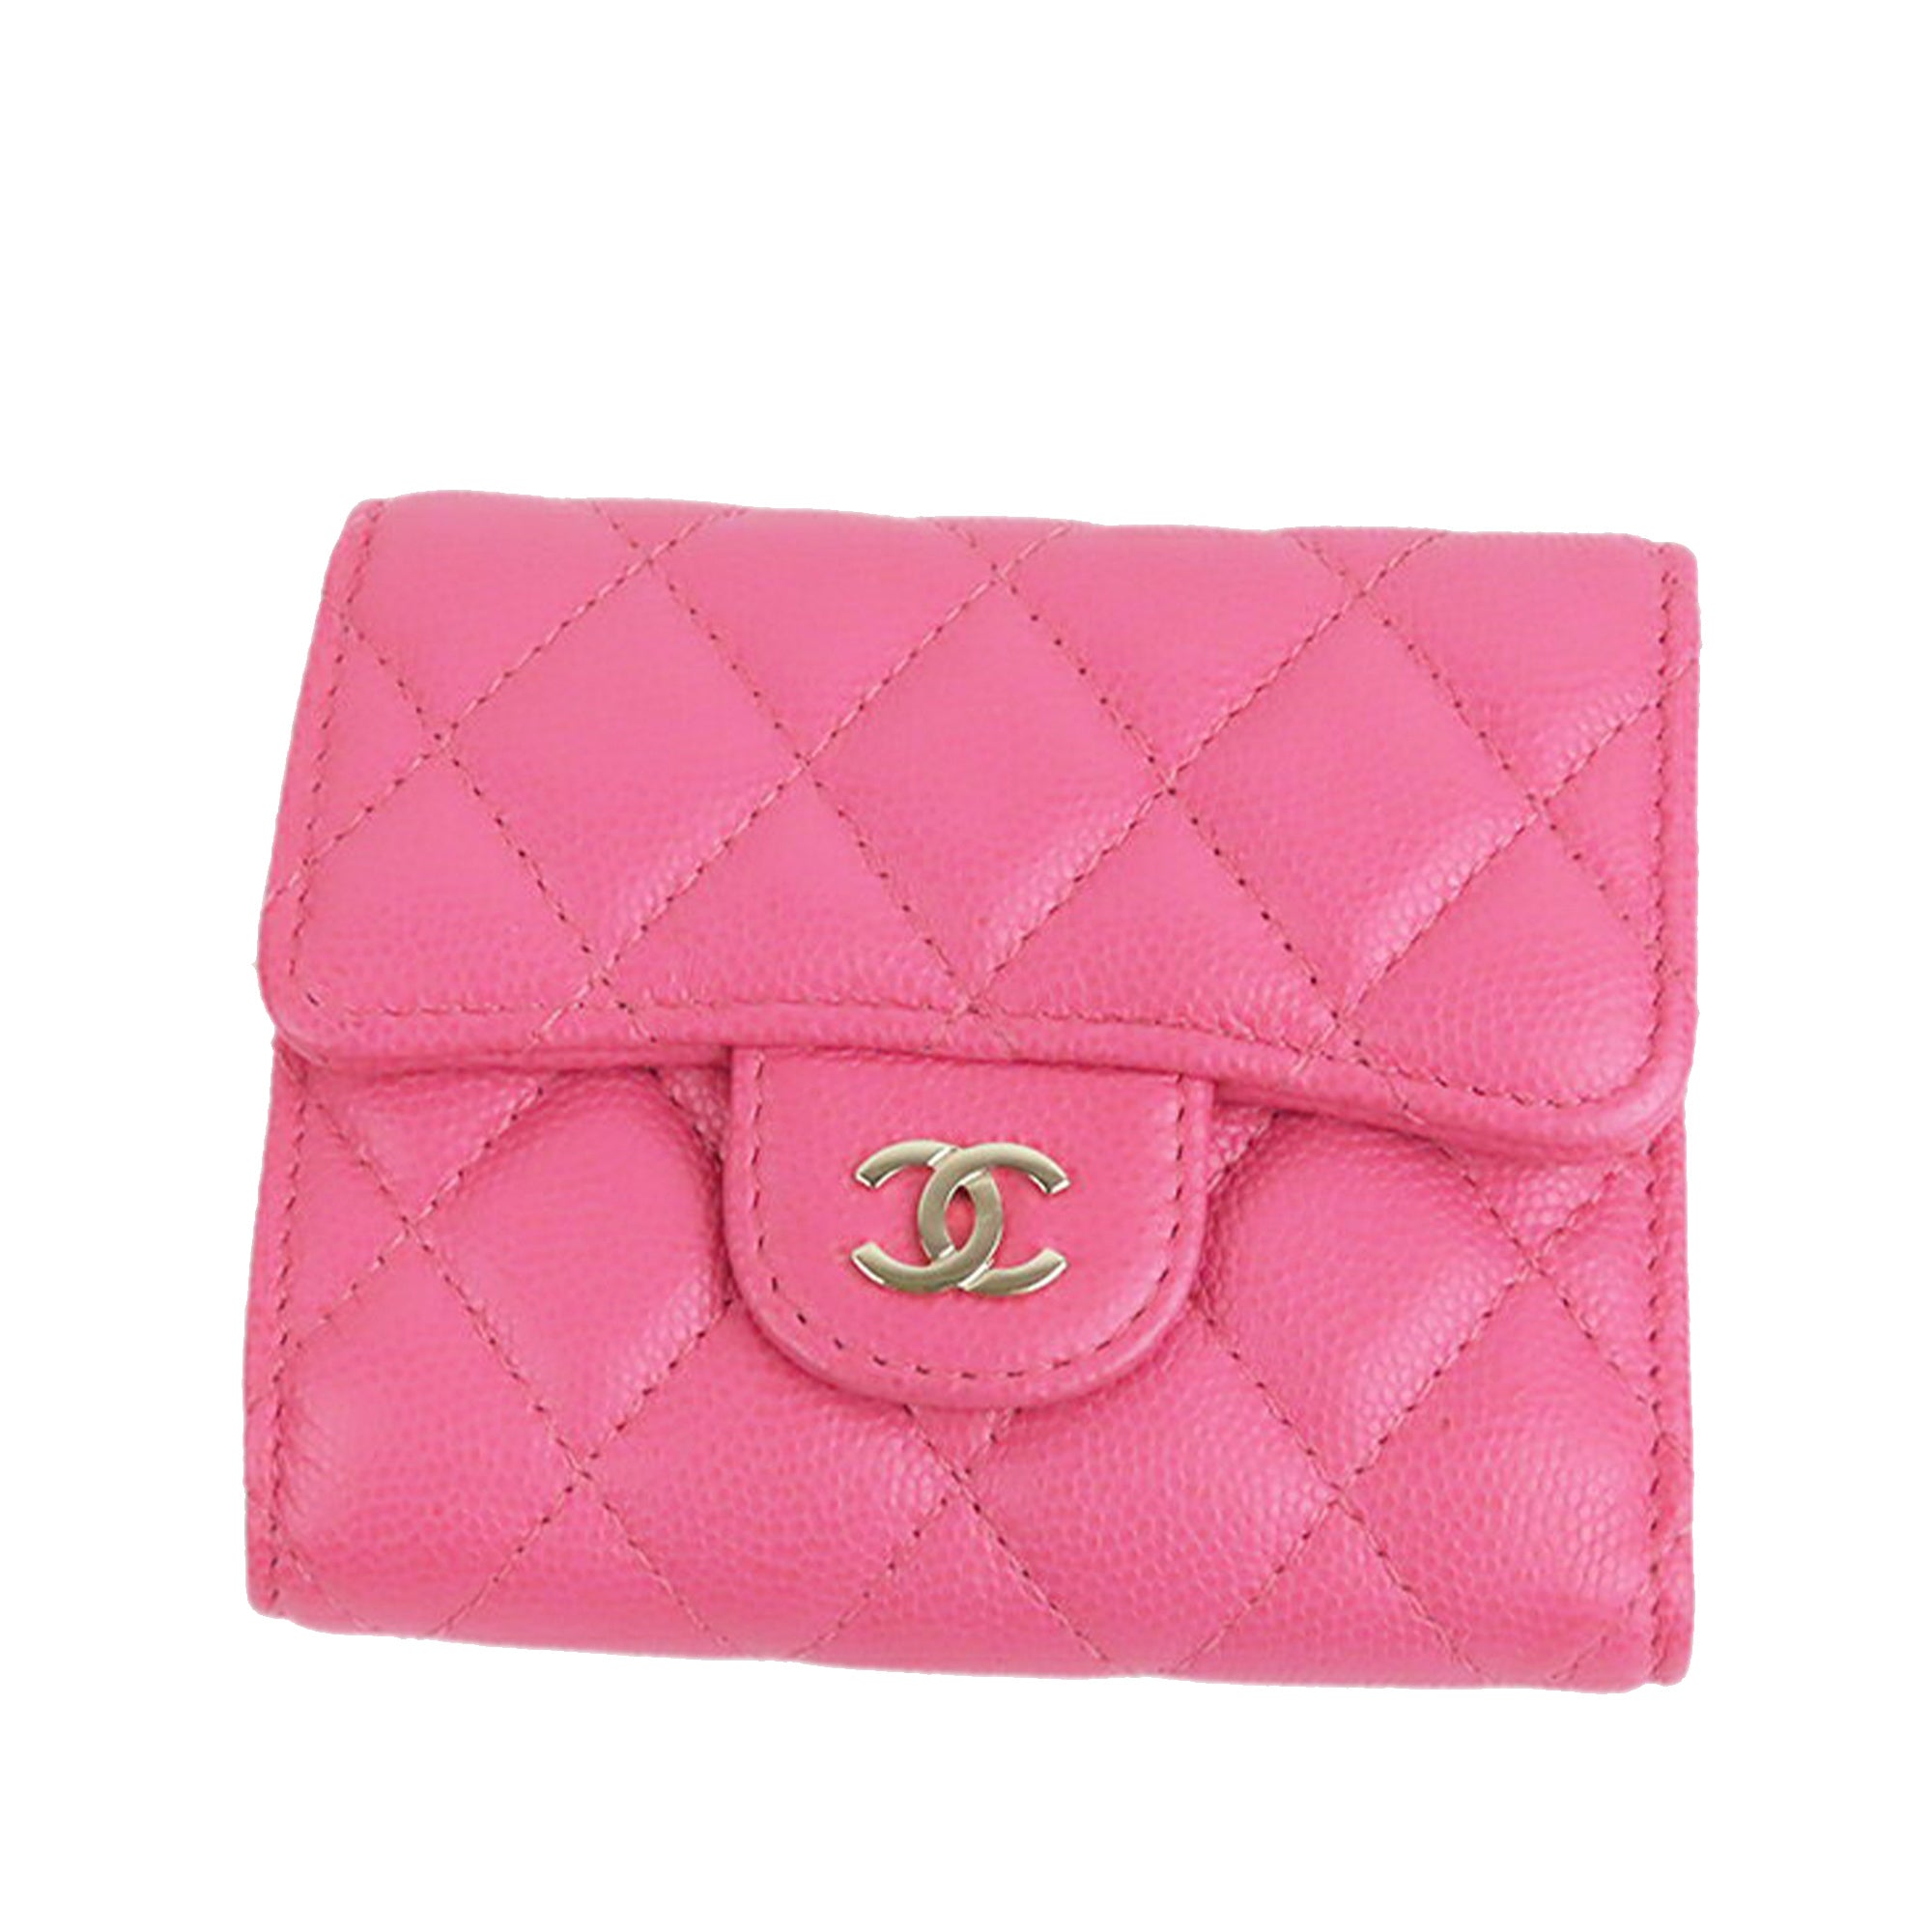 CHANEL, Bags, Chanel Red Cc Emblem Trifold Pocket Leather Wallet